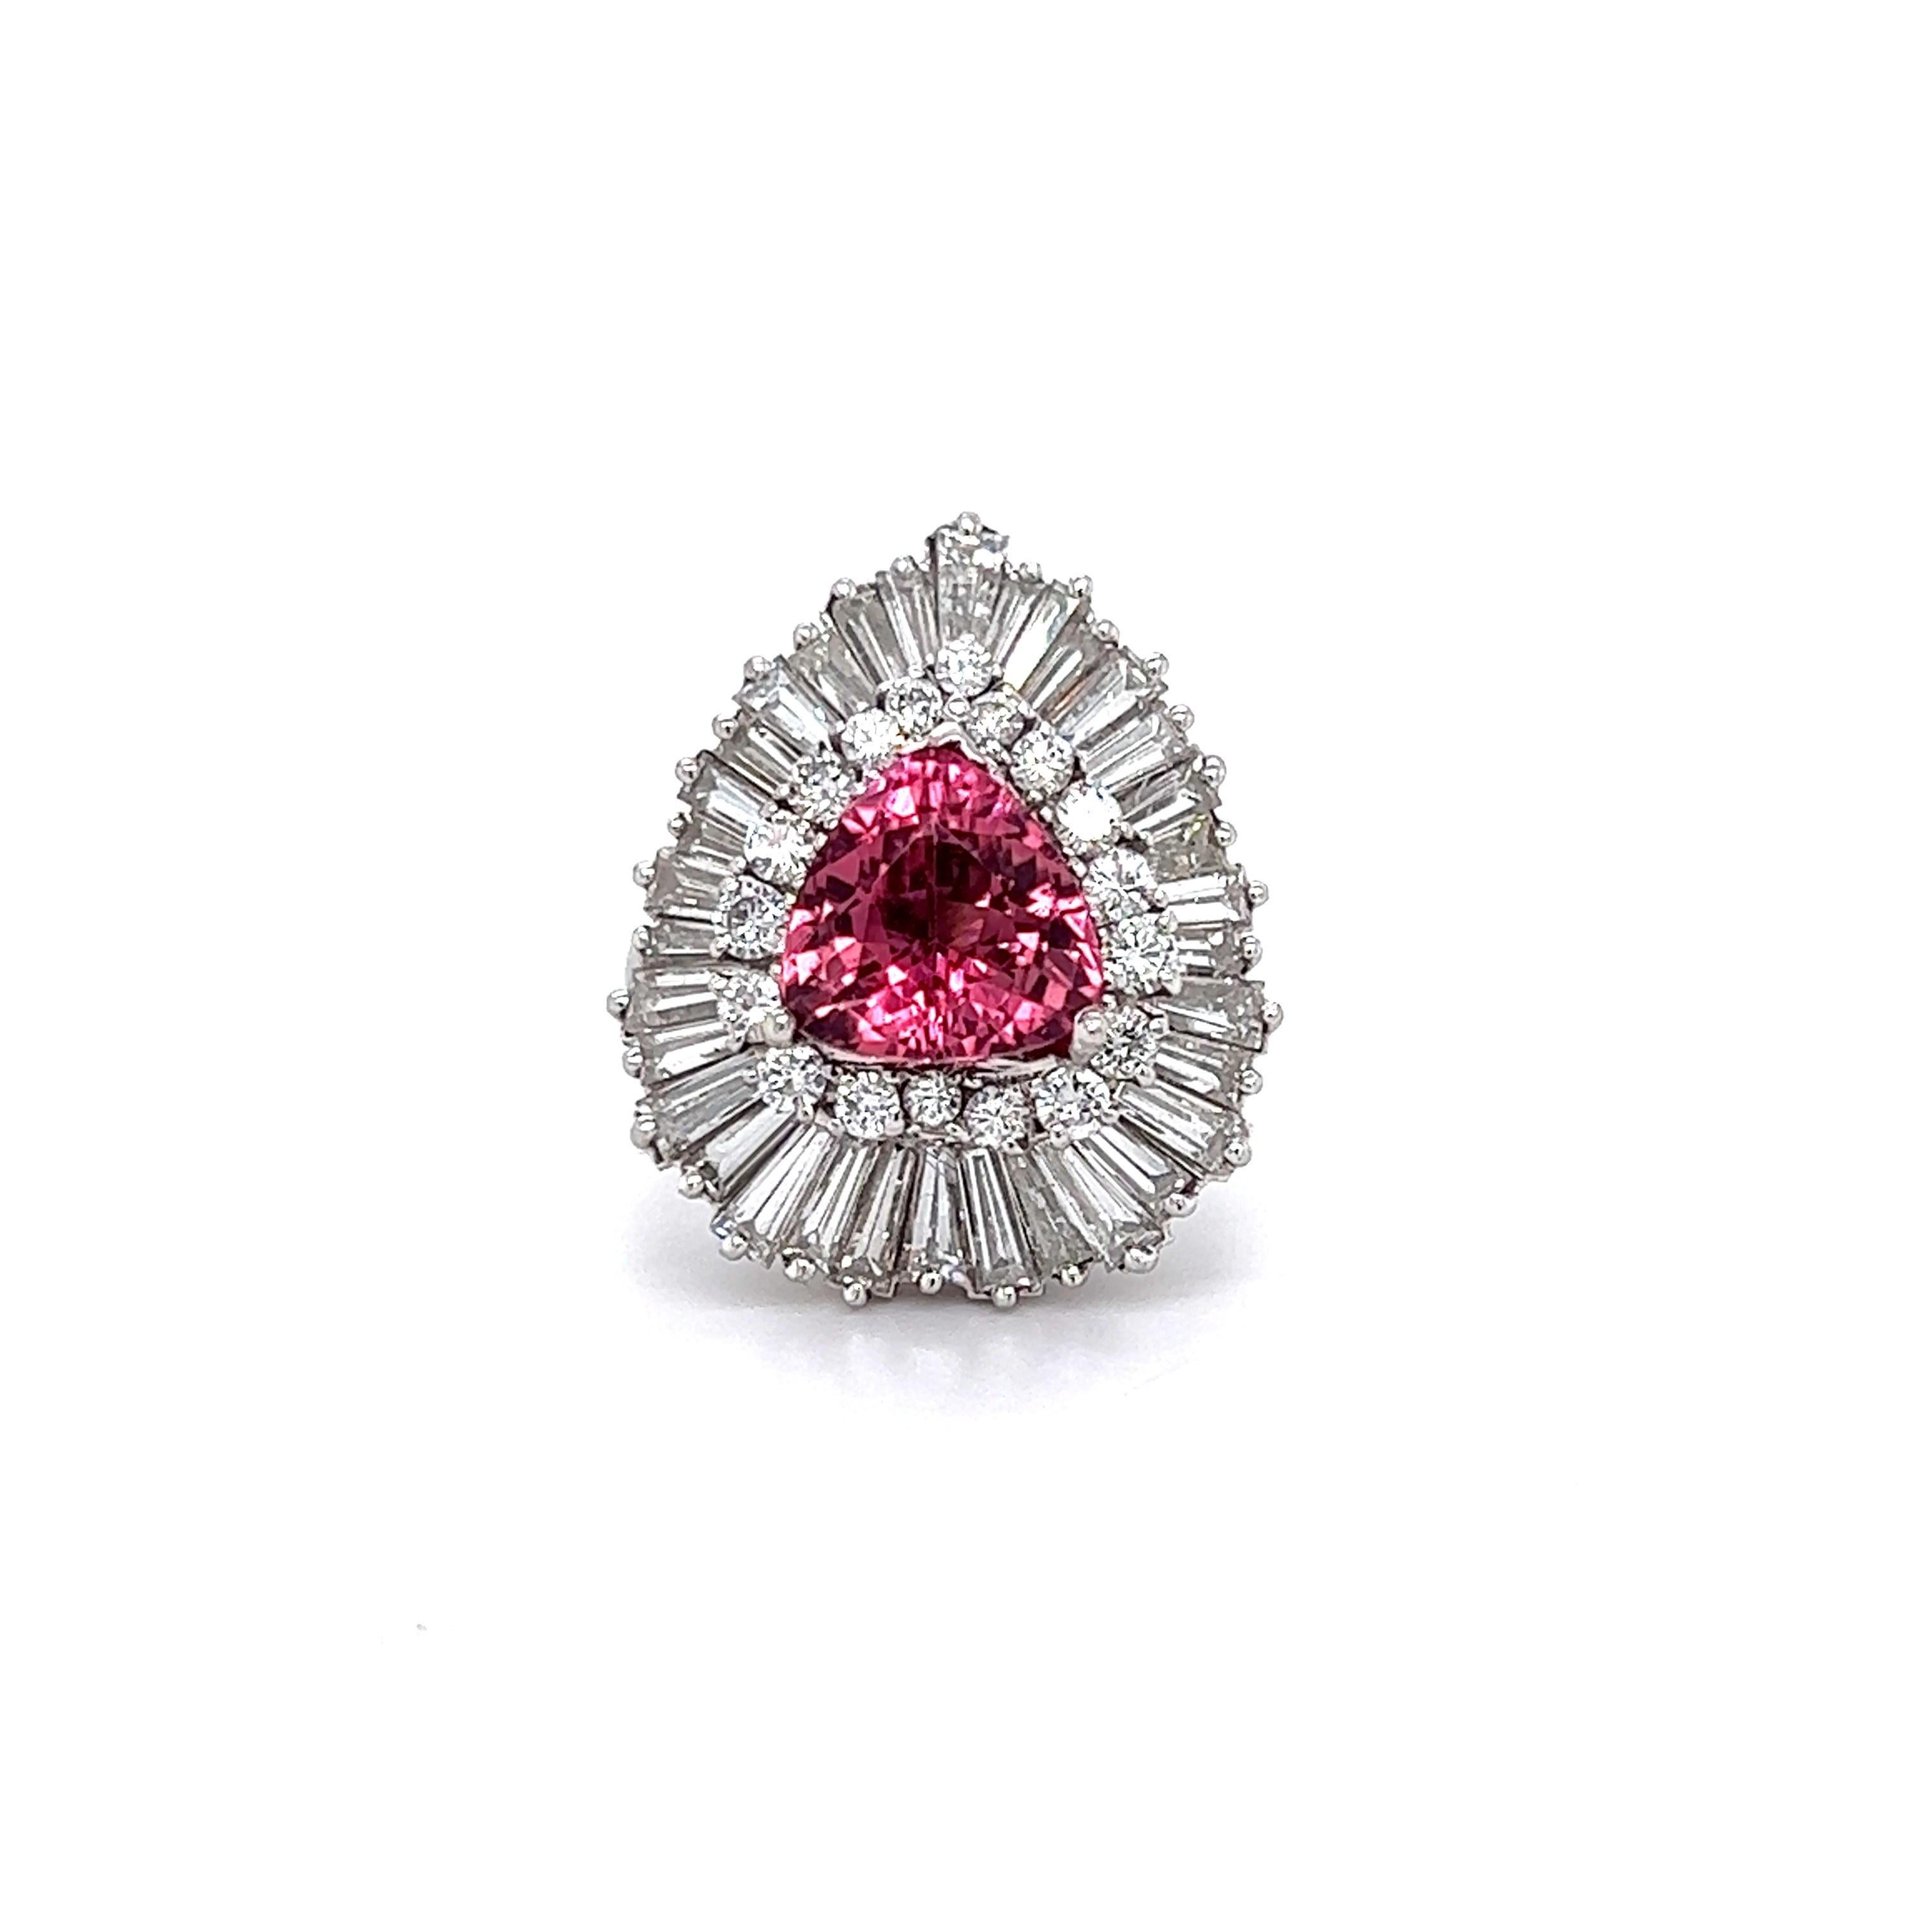 Platinum Baguette and Round Diamonds Trillion Cut Rubellite Ballerina Ring

A unique ring with tapered cut baguettes and round diamonds surrounding the center Rubellite

Apprx. 5.50ct. G color VS Clarity diamonds total weight.

3.05ct. Trillion cut